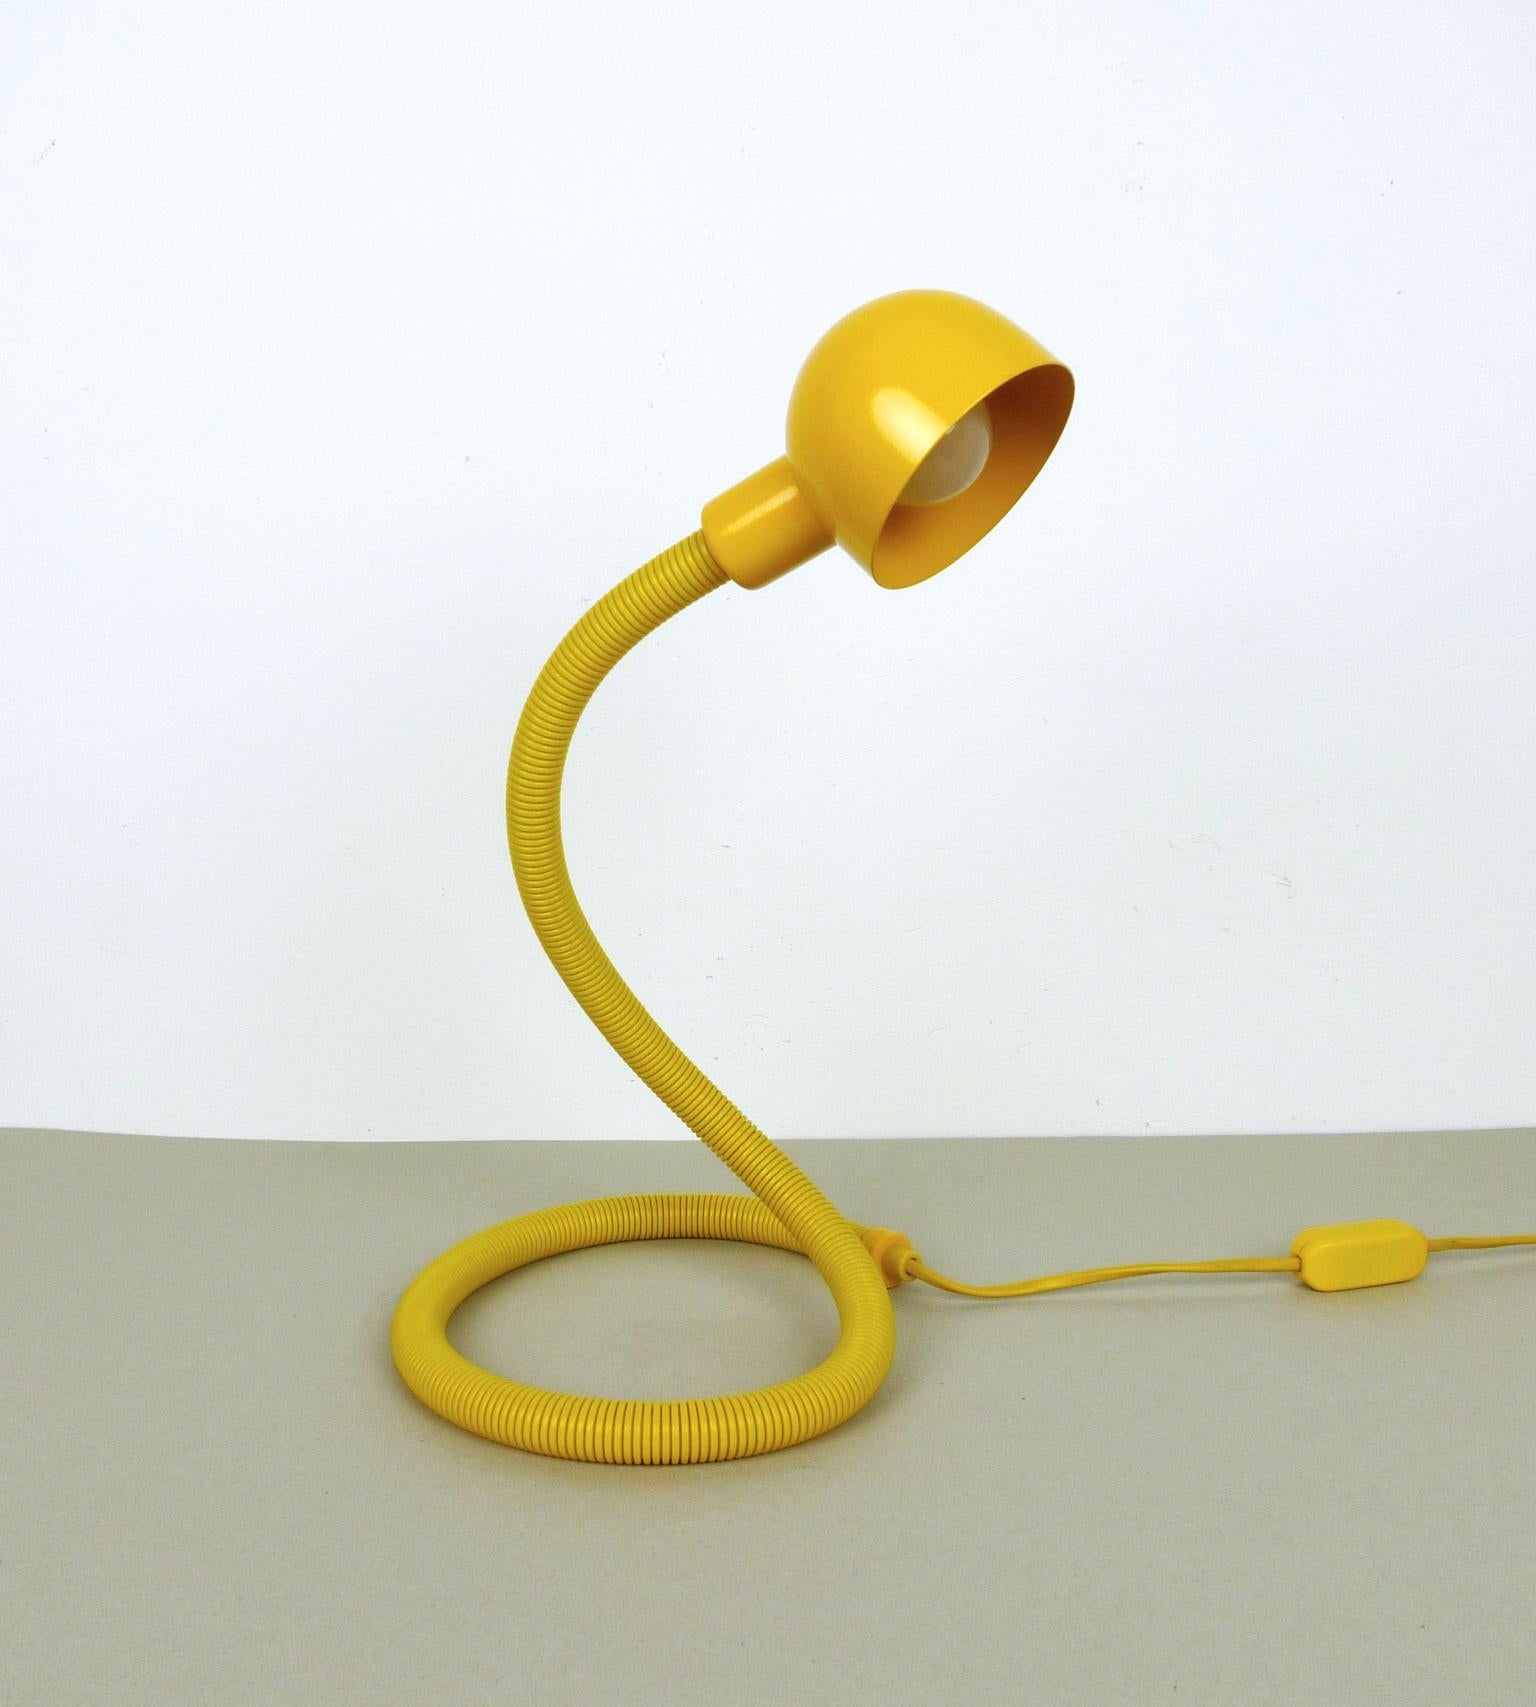 This yellow table lamp from the 1970s features a long, flexible swan neck and a rotating metal lampshade. Its long, slim body is shaped like a snake and can be bent into different positions. The lamp has an E 14 bulb socket and it is in very good